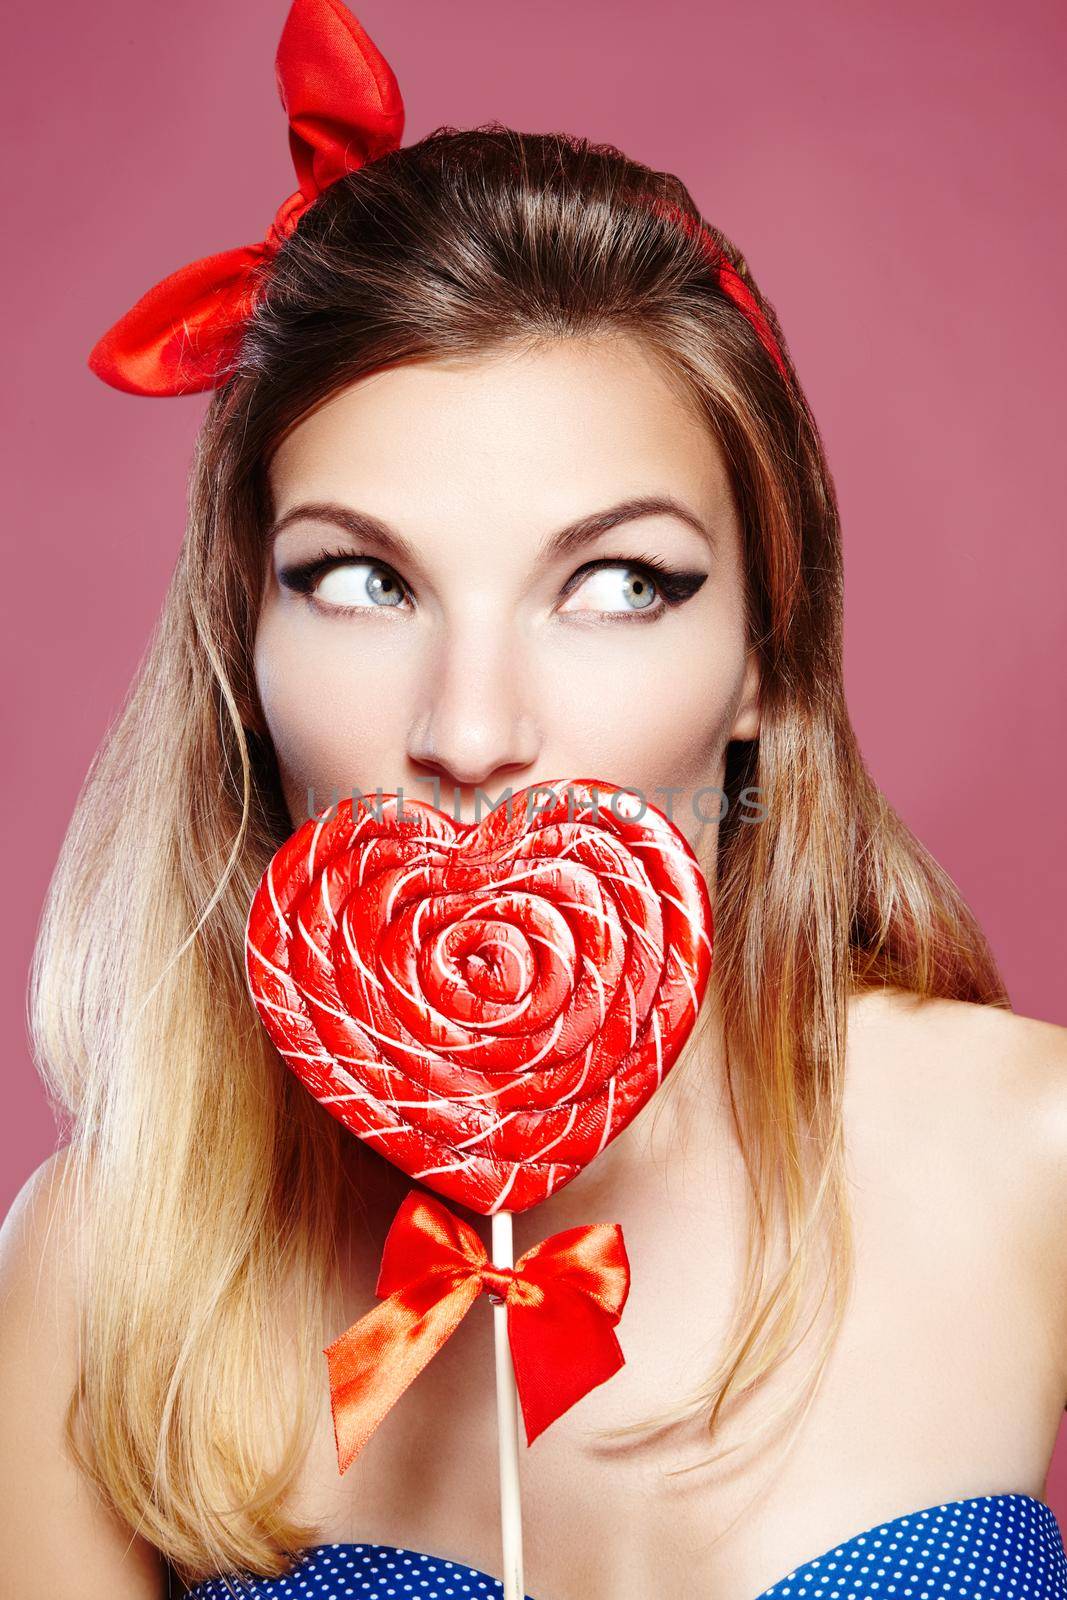 Sexy american style. Pinup girl with cute red bow accessories in her blond hair. Playful happy young woman with sweet candy lollipop in heart symbol shape. Beautiful valentine style of beauty